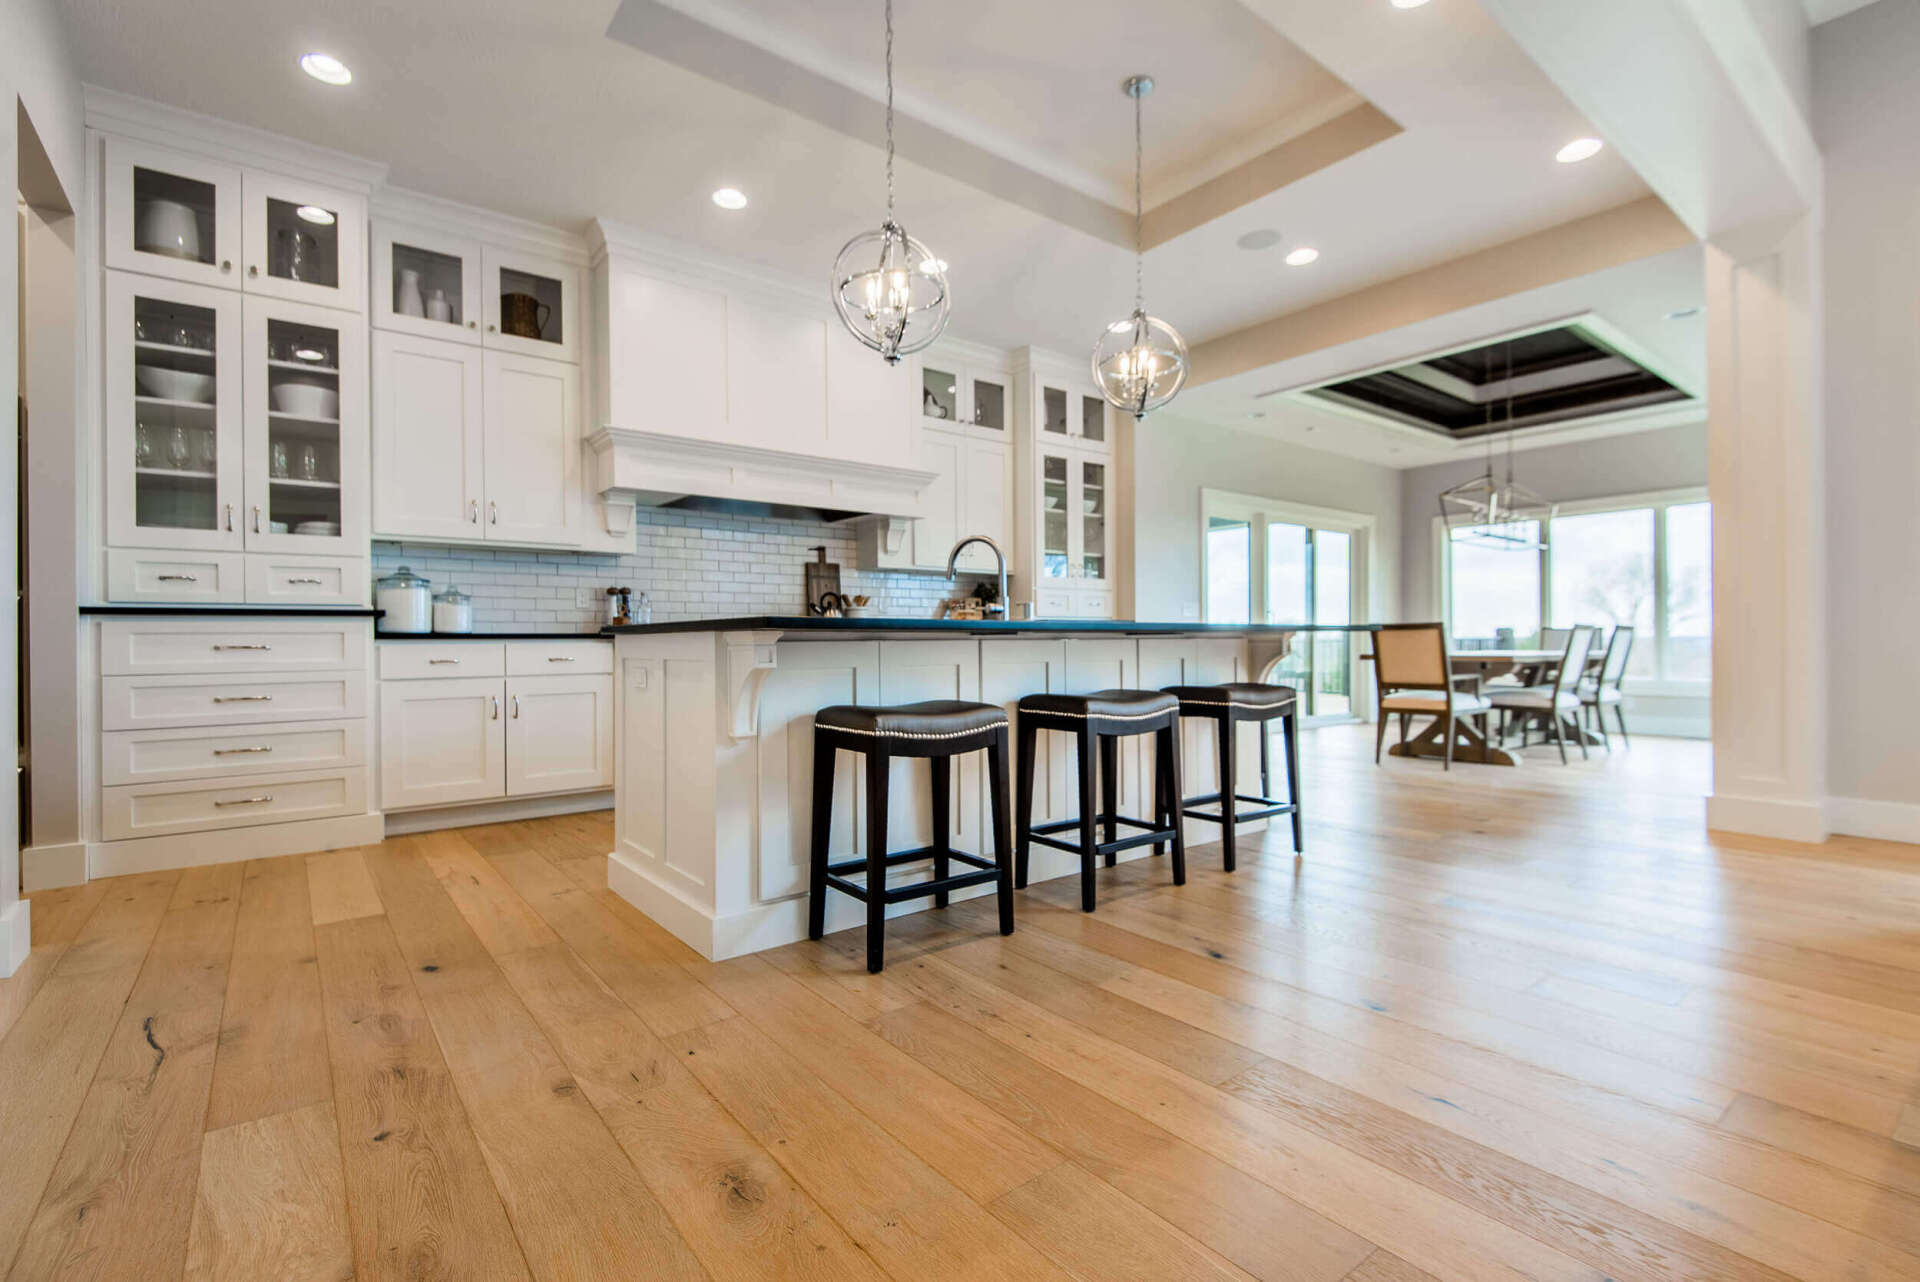 3 kitchen cabinet ideas to go with oak flooring